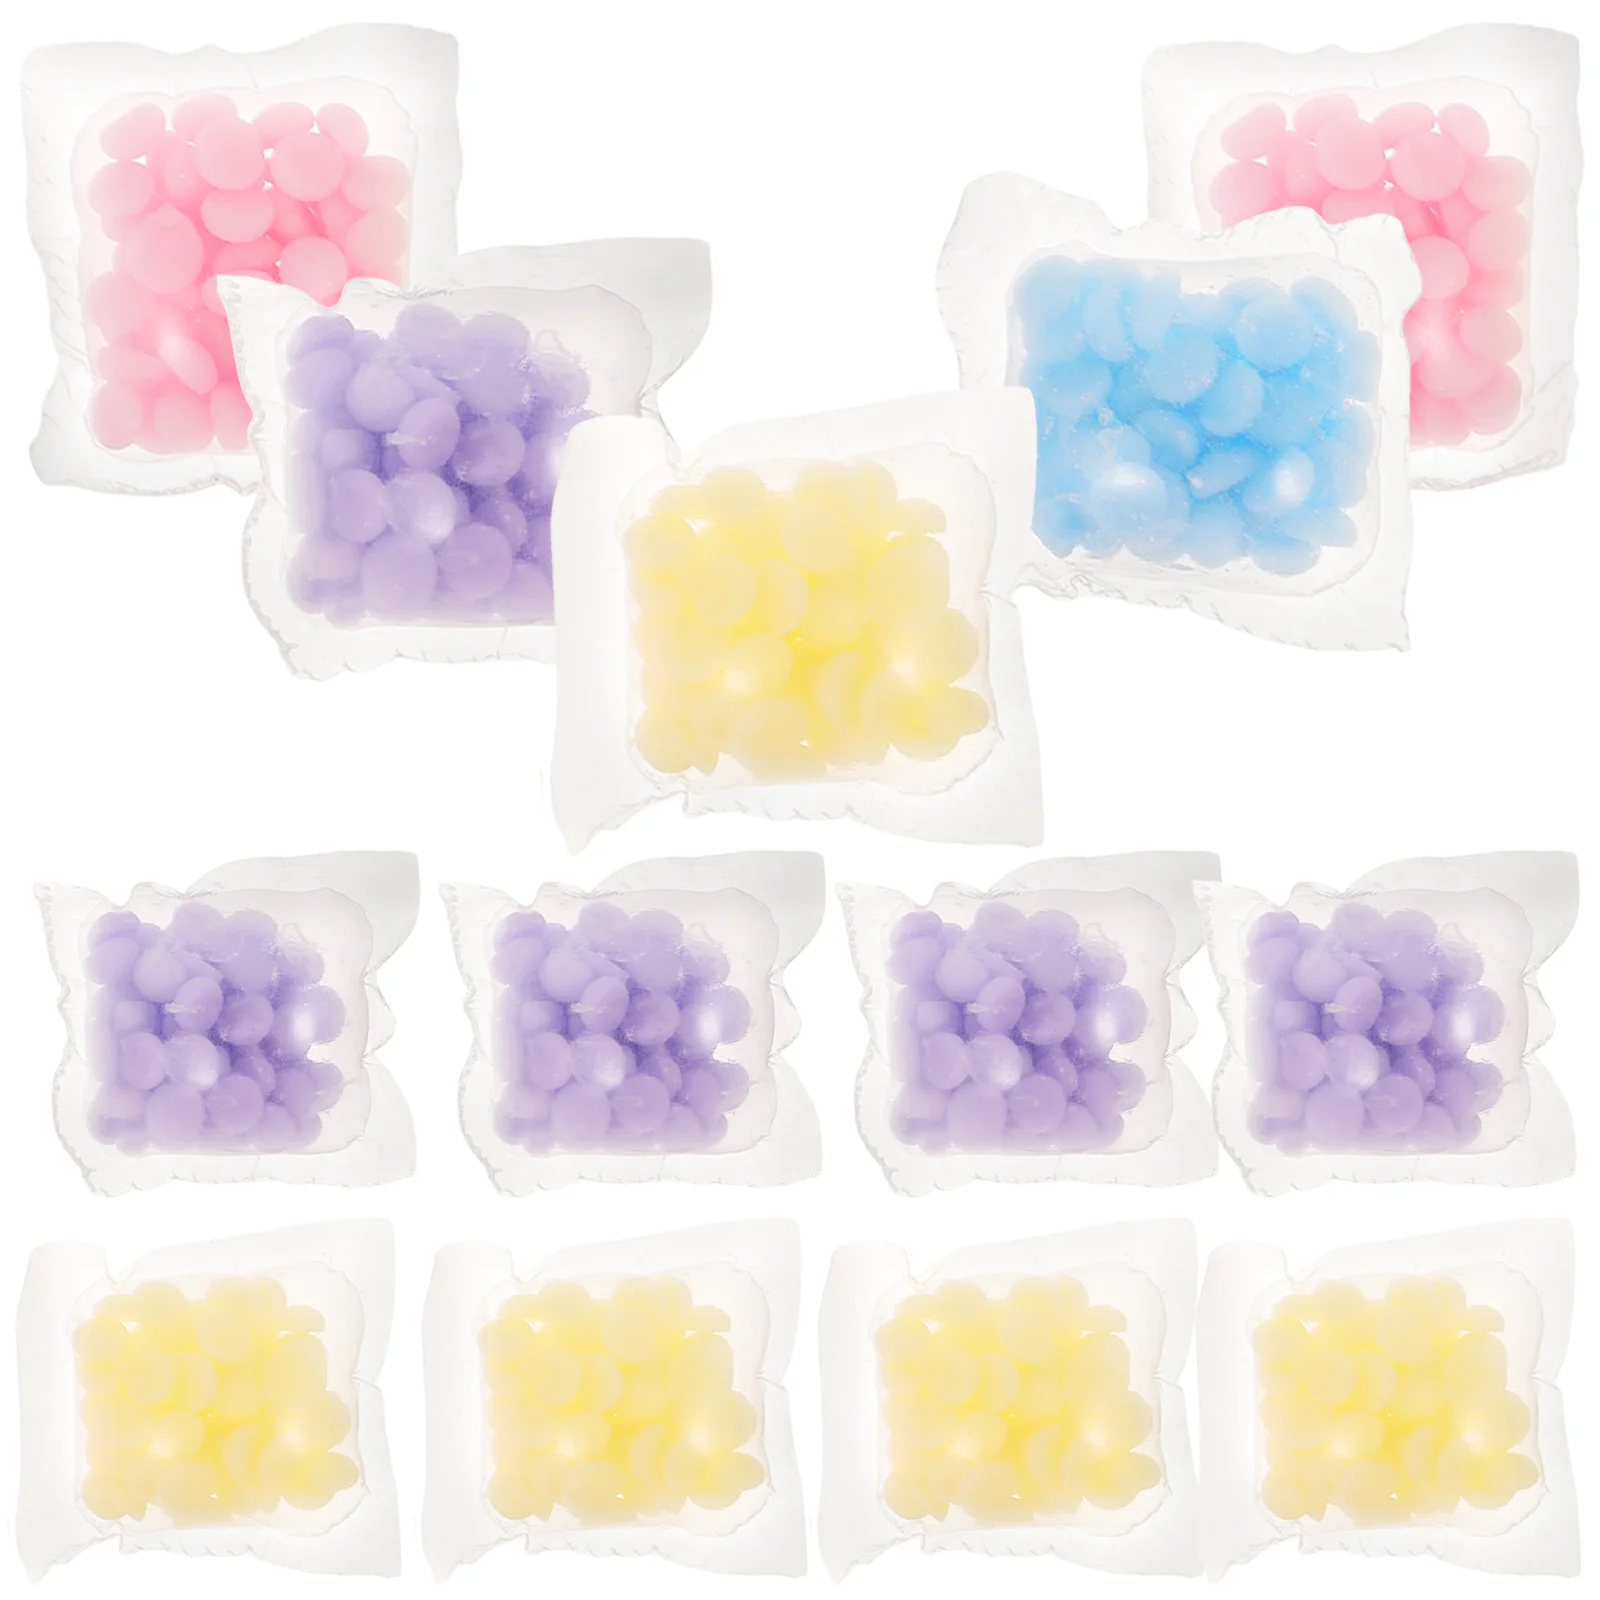 

50 Pcs Fragrance Condensate Beads Cleaning Tools Clothes Concentrated Laundry Softener Wash Scent